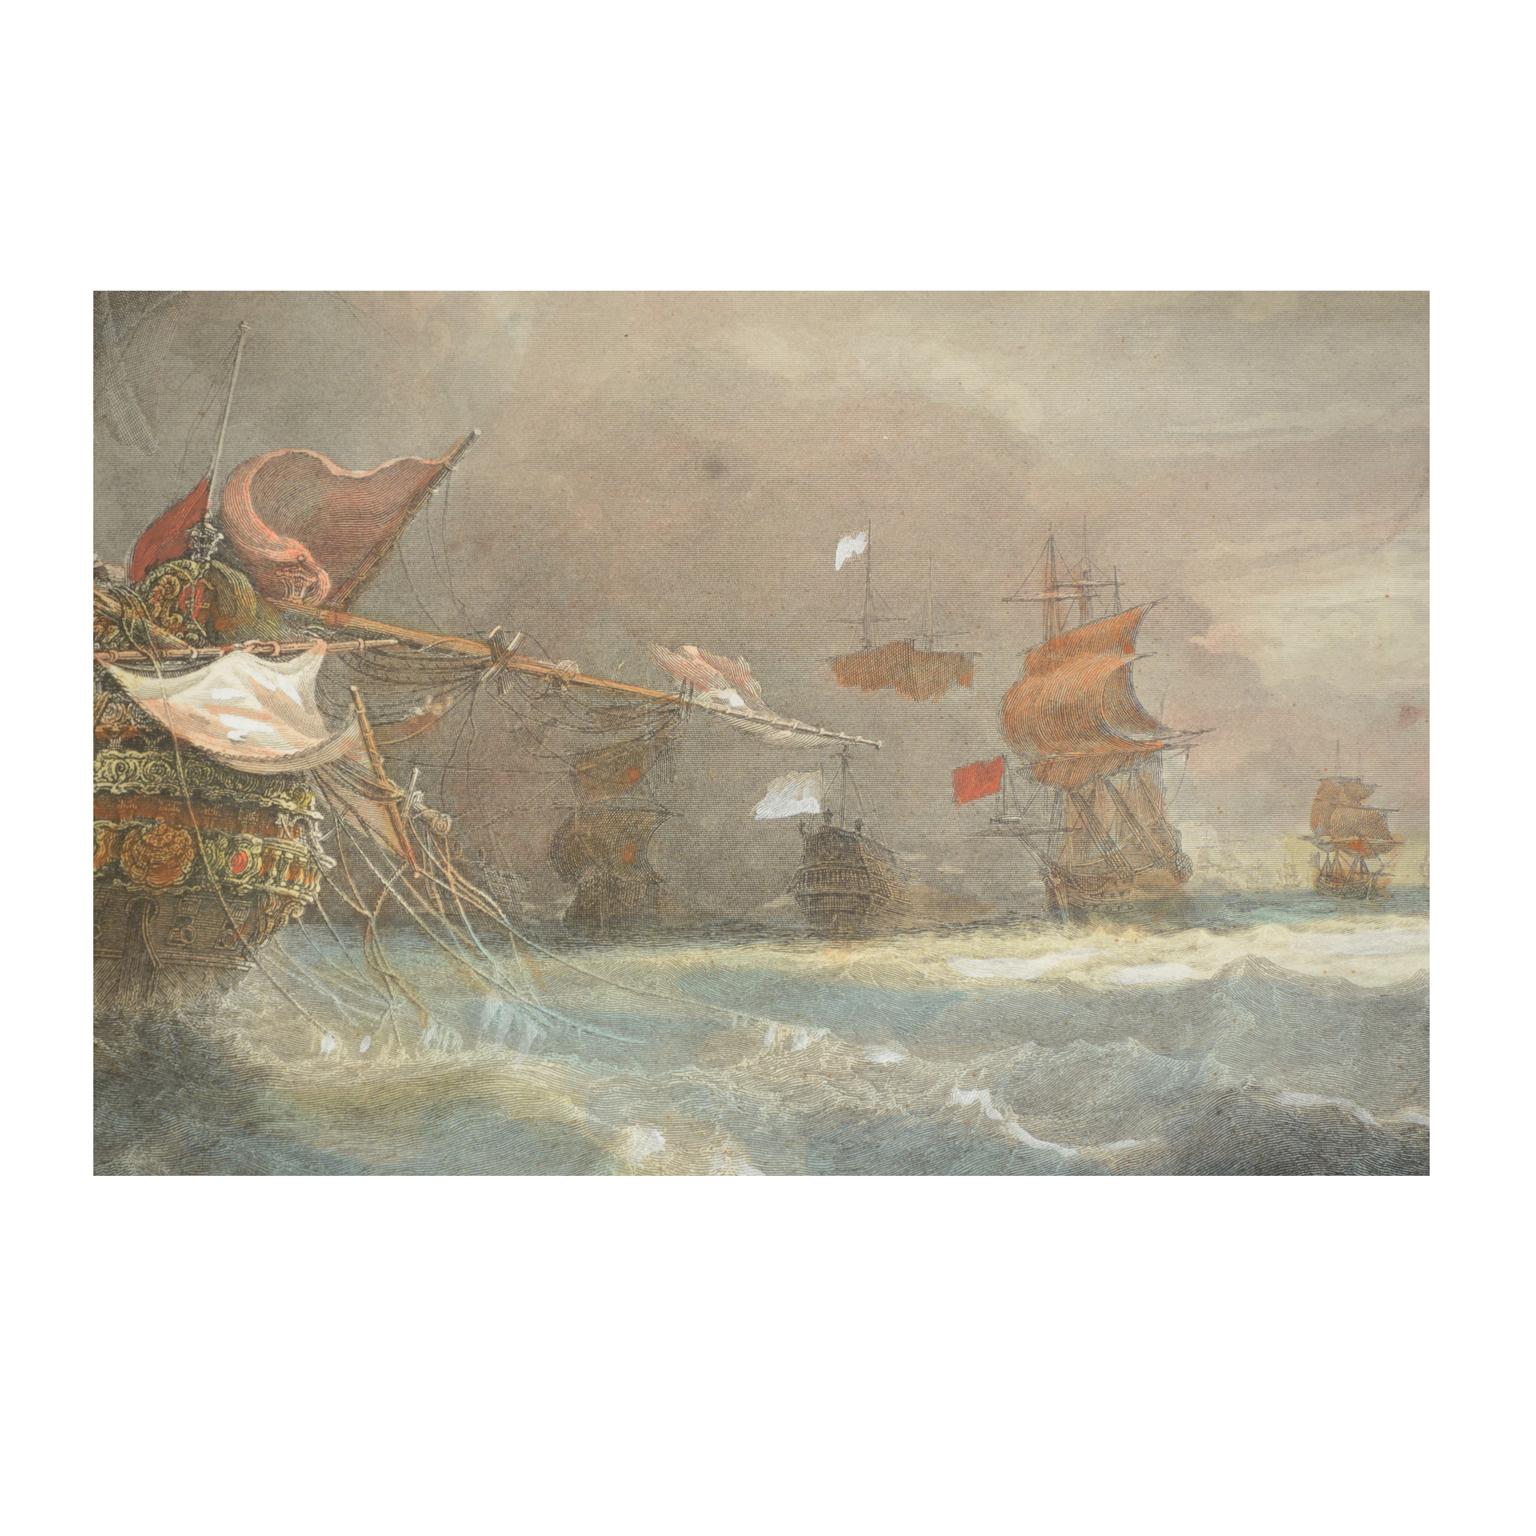 Vintage Lithographic Print of Battle of Cape Lèzard, Early 1900s, Oakwood Frame For Sale 1